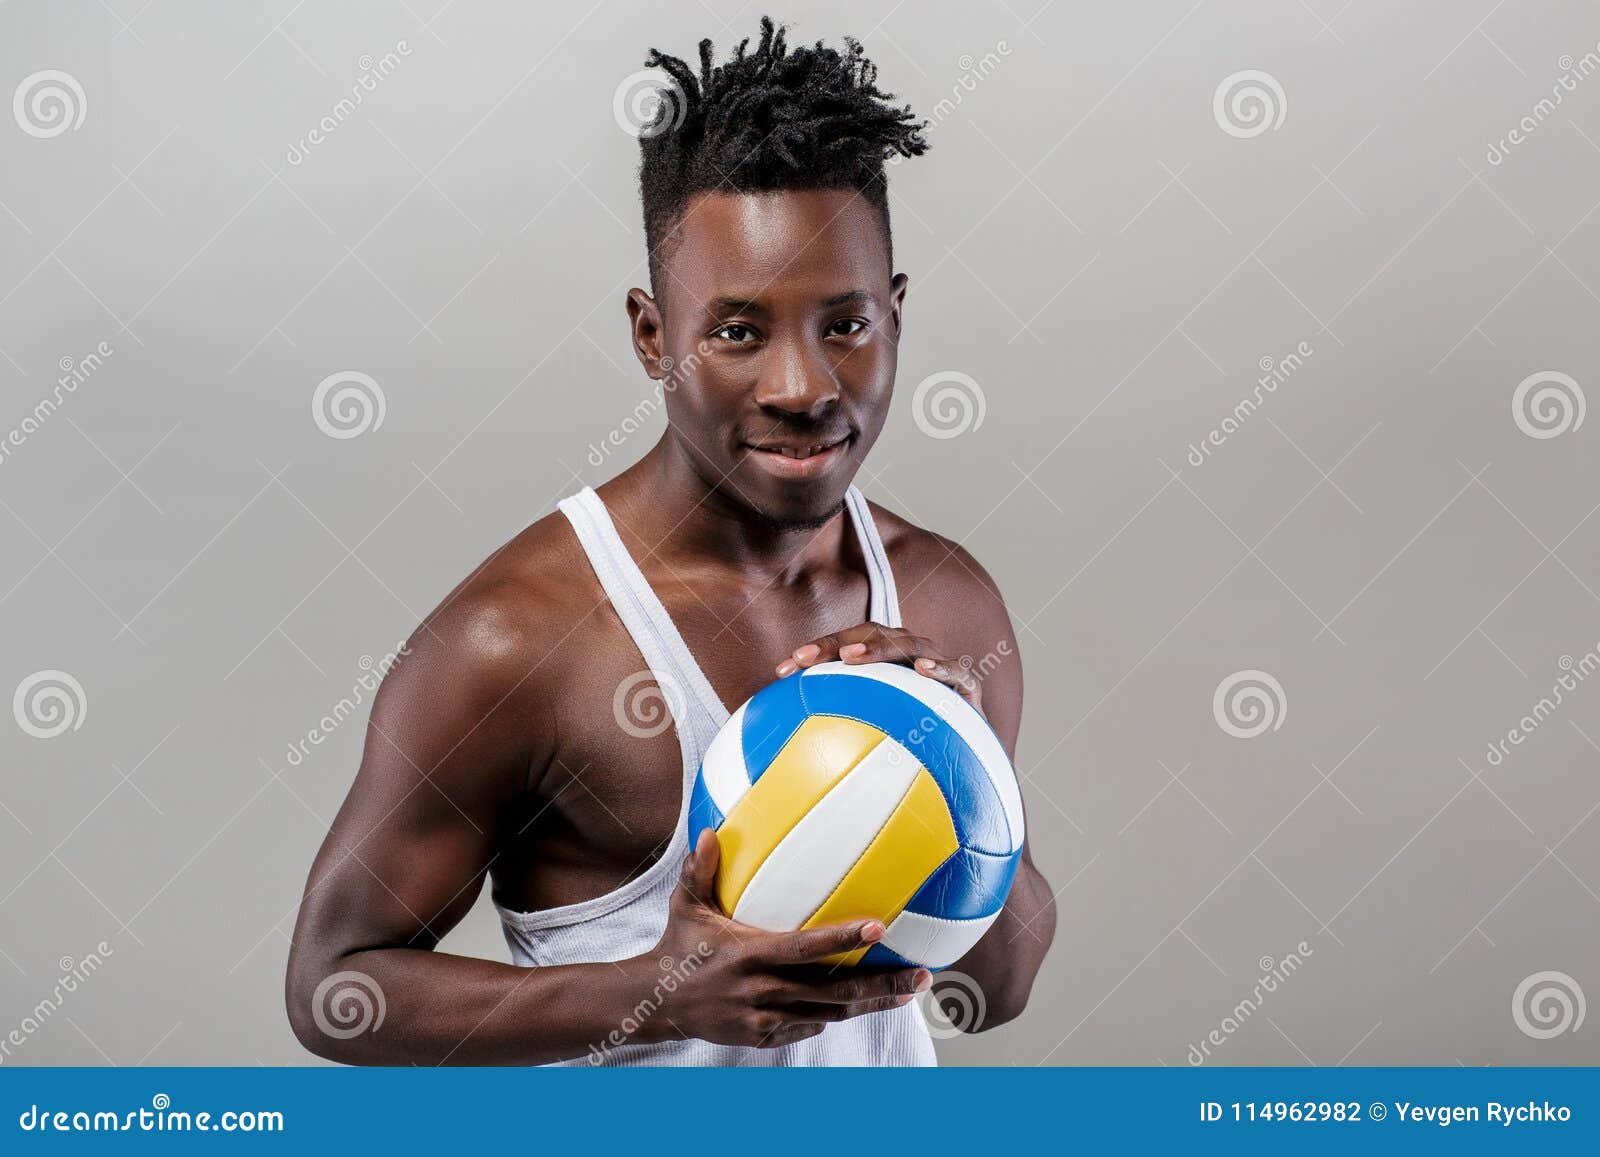 African-American Man With Volleyball Stock Image - Image 